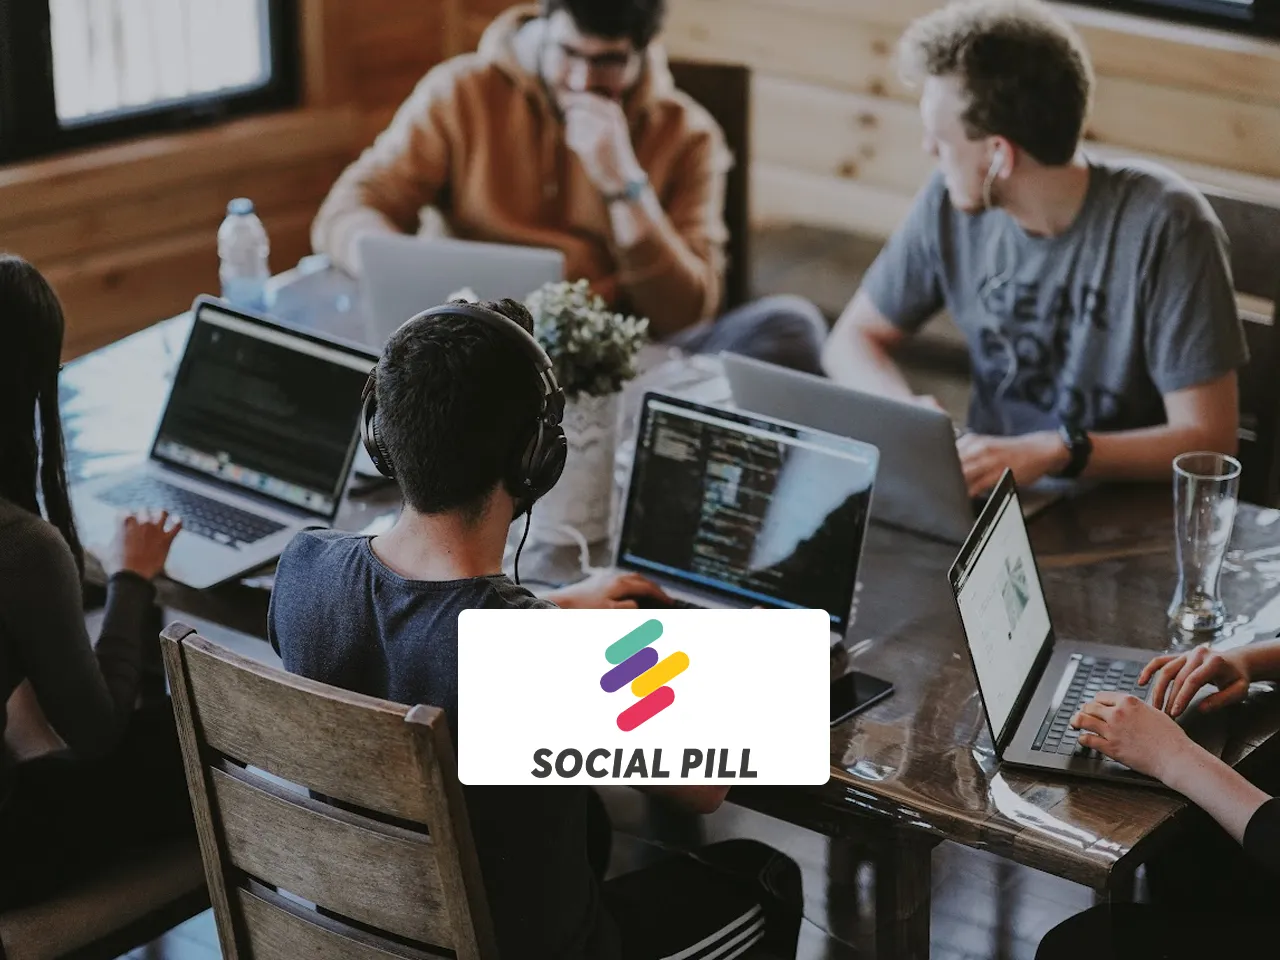 Agency Feature: All you need to know about Social Pill